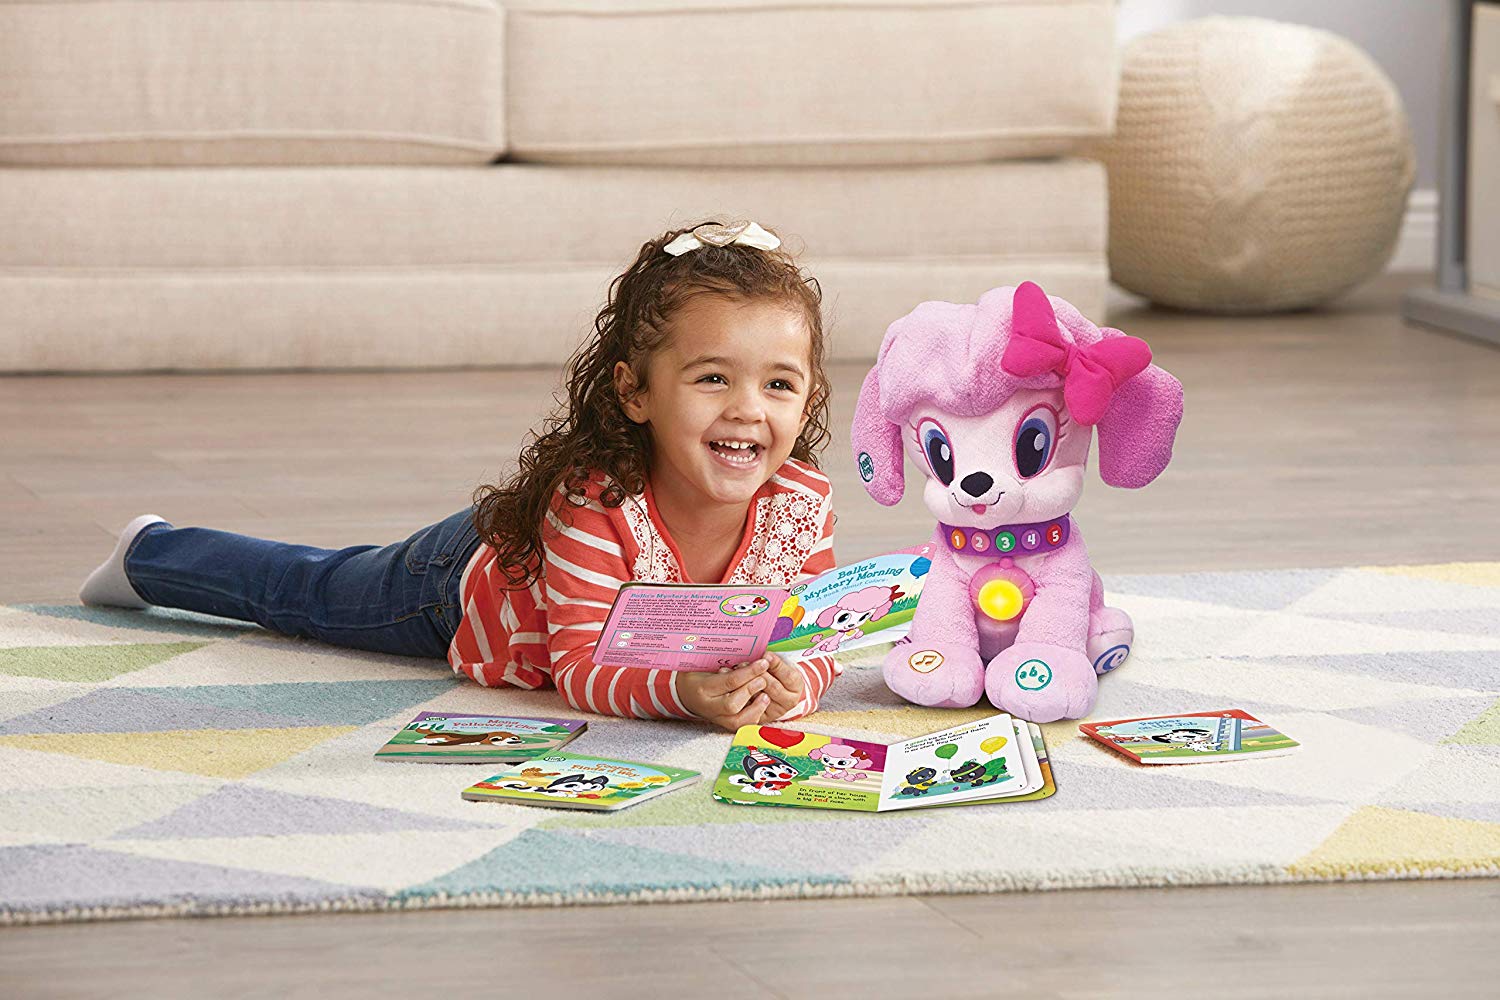 LeapFrog Storytime Bella 23cm Interactive Toy 603553 for sale online 